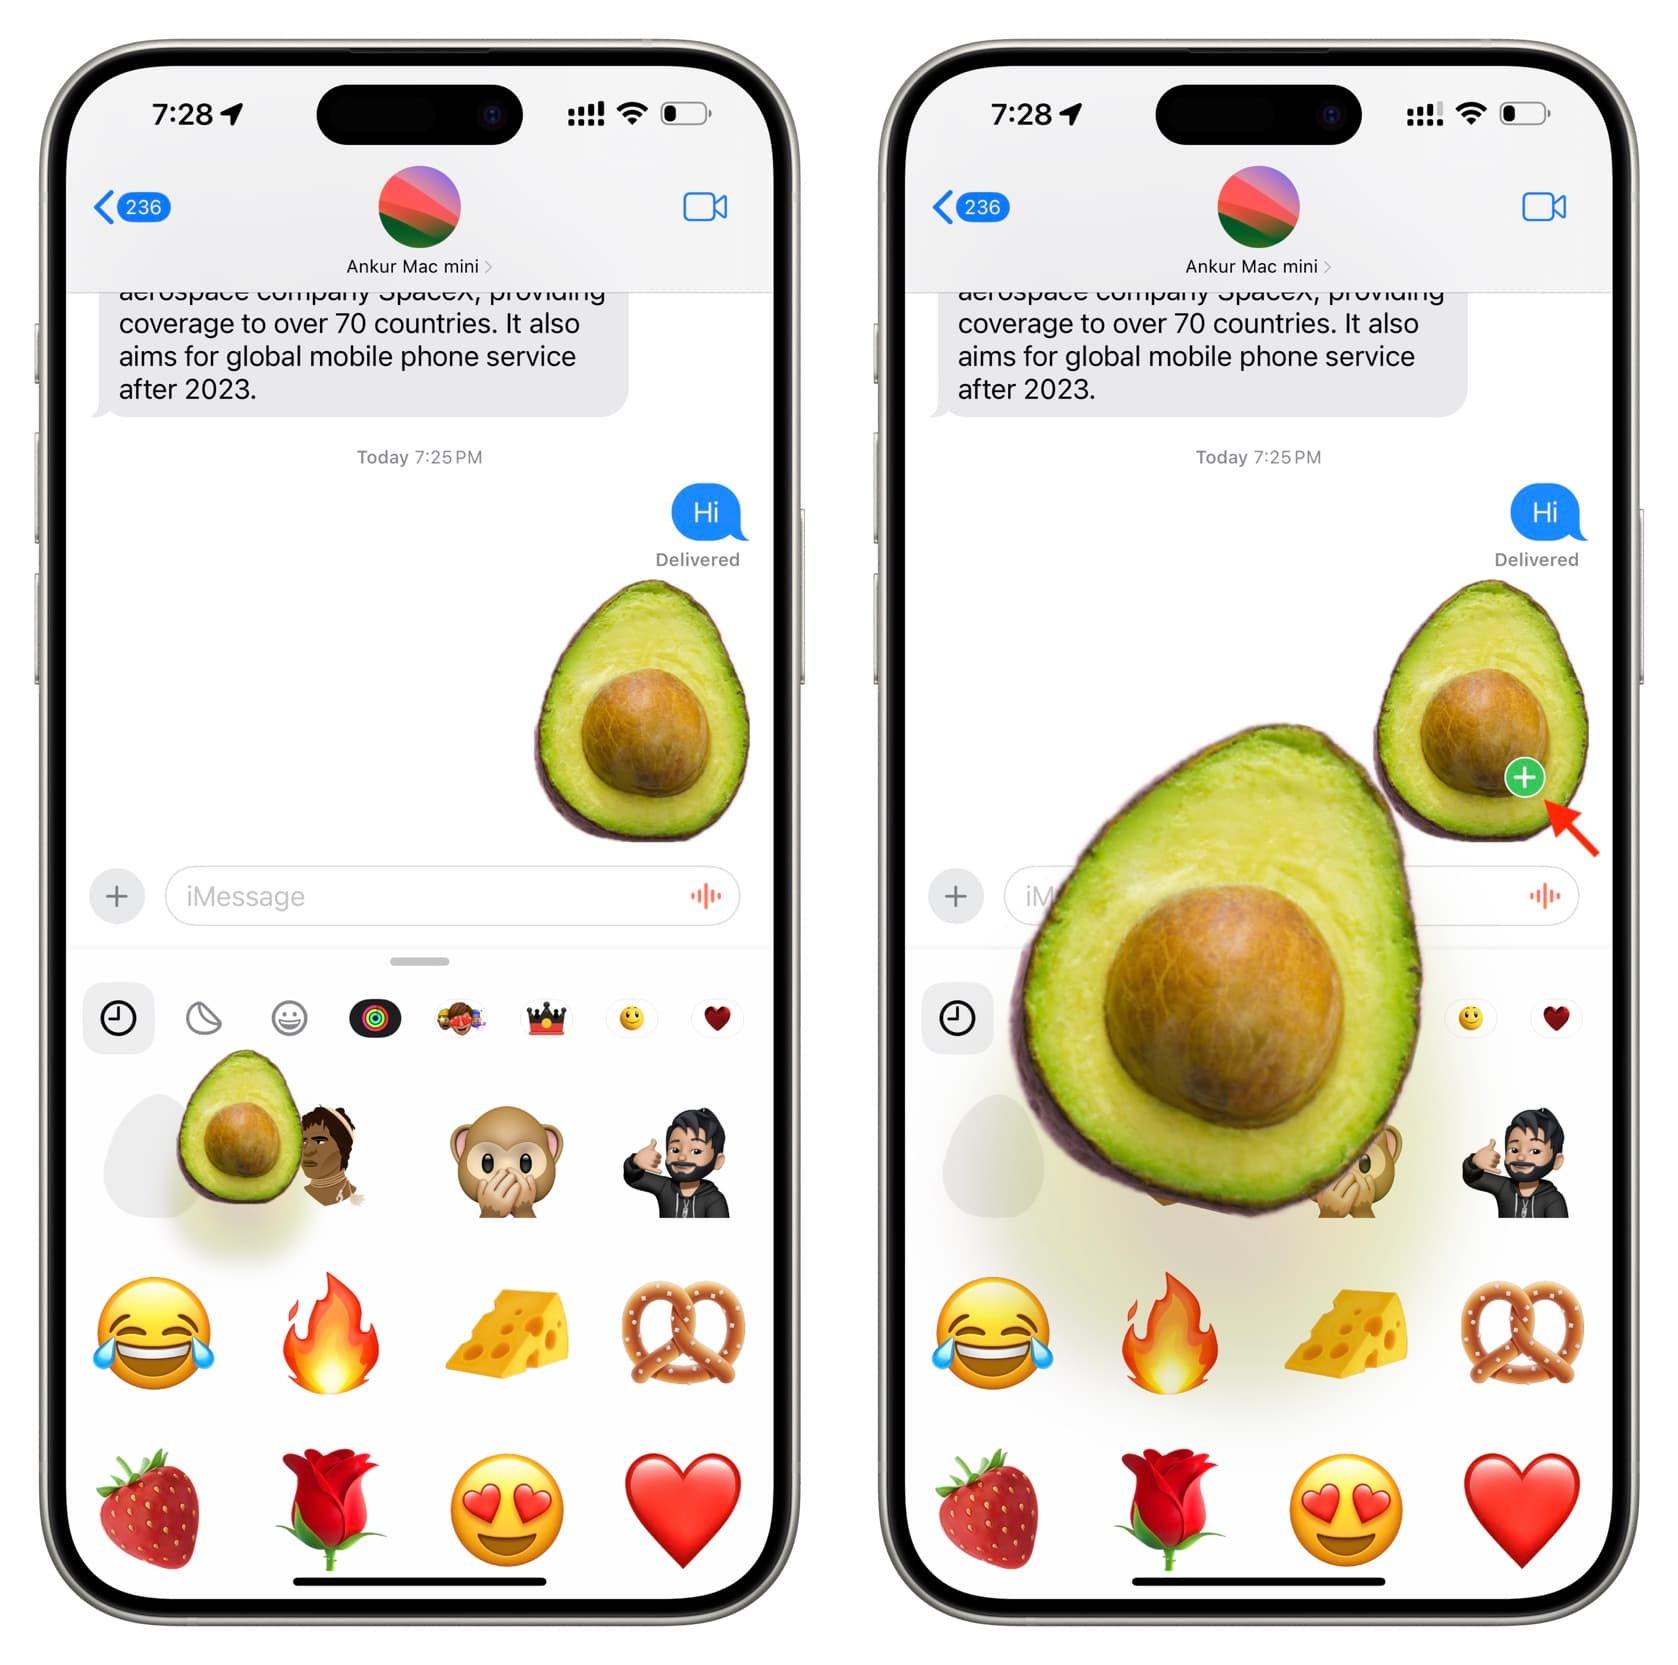 Increase size of sticker before sending it in Messages on iPhone